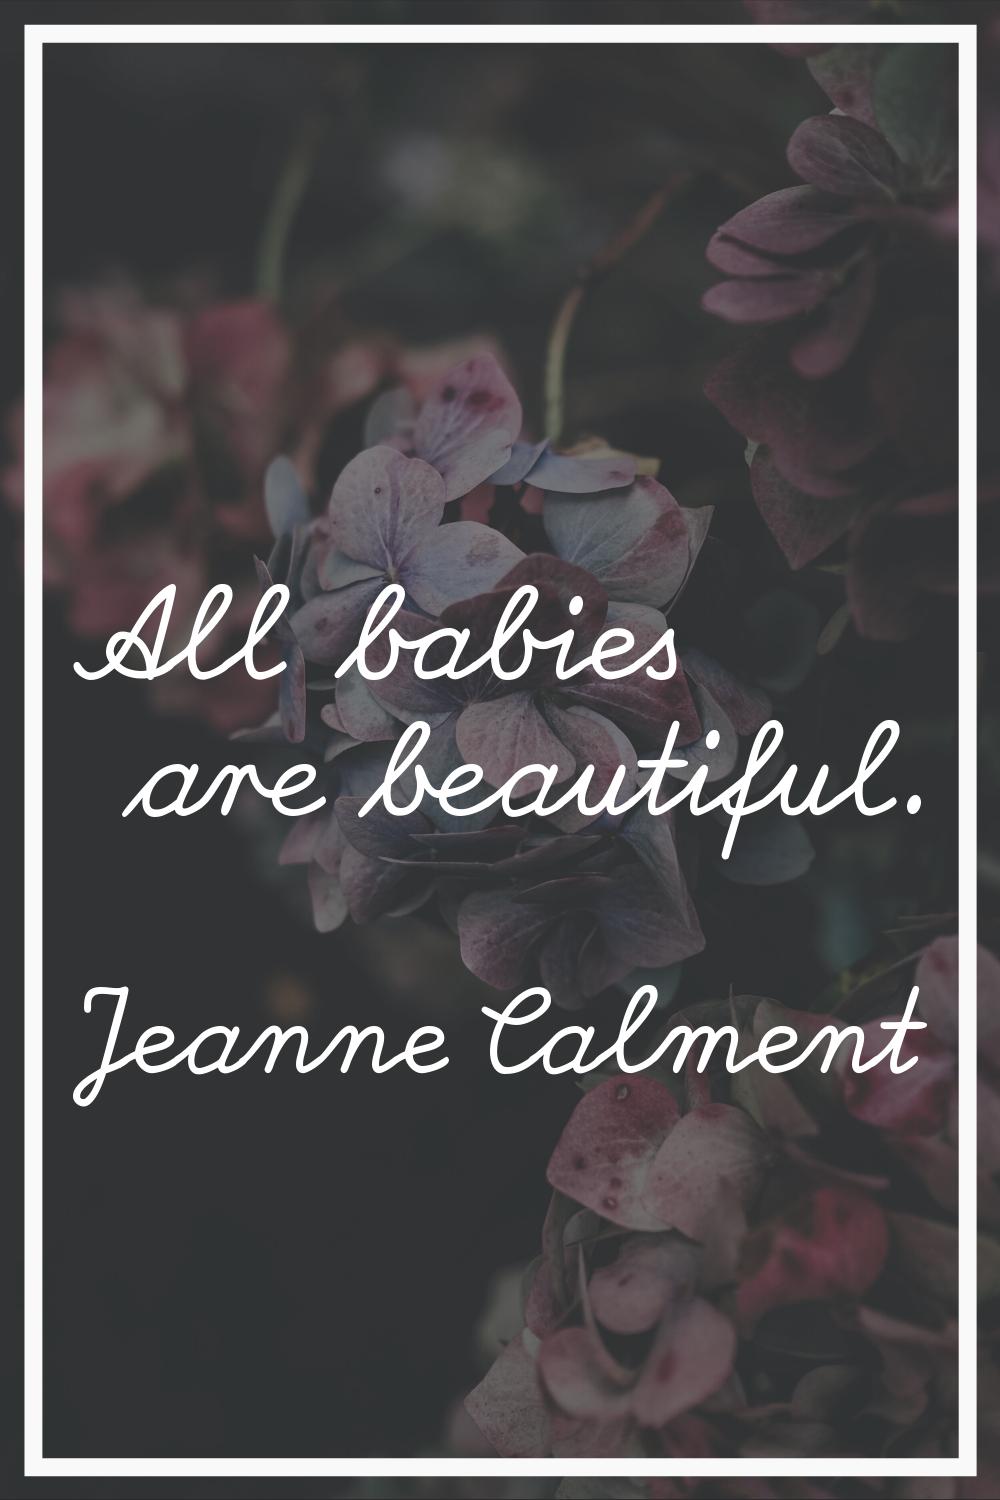 All babies are beautiful.